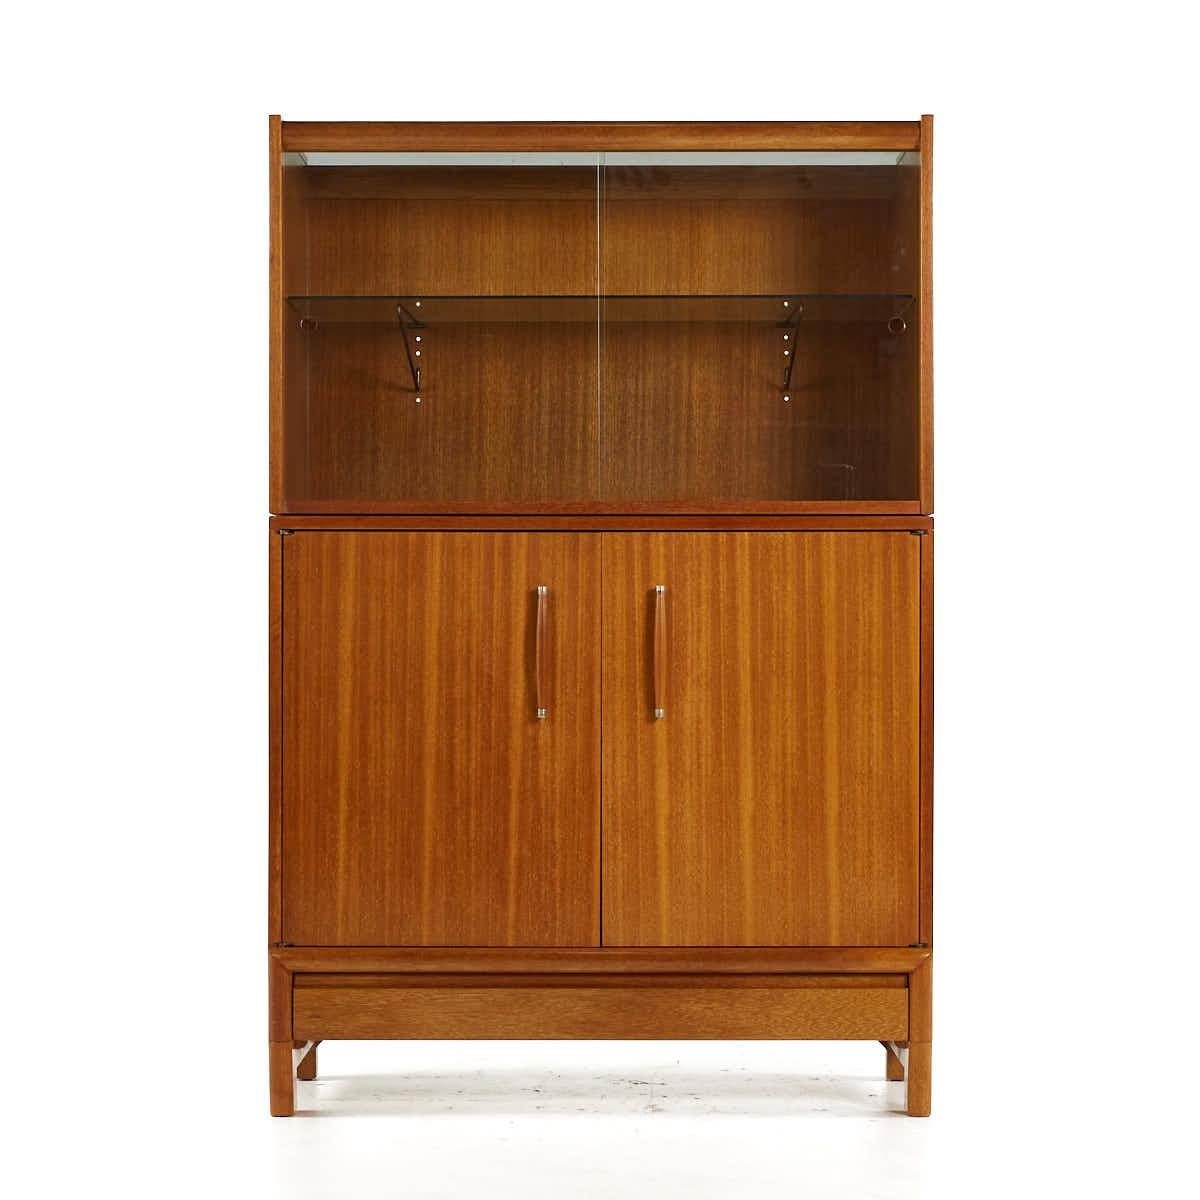 John Keal for Brown Saltman Mid Century Bleached Mahogany Buffet and Hutch

The buffet measures: 40 wide x 17 deep x 36 inches high
The hutch measures: 40 wide x 16 deep x 24 inches high
The combined height of the buffet and hutch is 60 inches

All